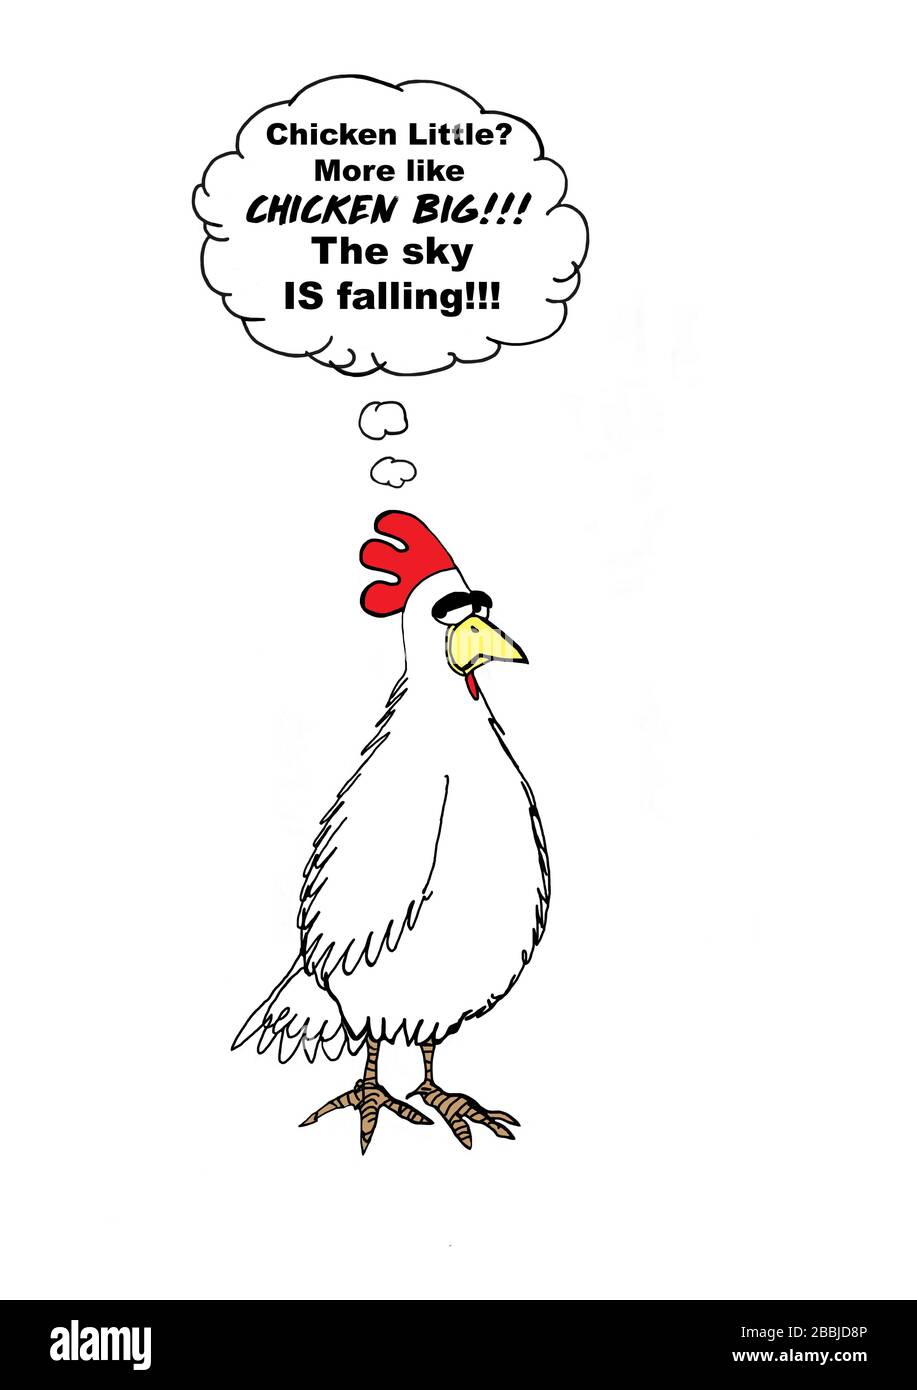 Color cartoon showing a chicken exclaiming that it is not ‘chicken little’, but rather more like ‘chicken big’ since the sky truly IS falling. Stock Photo